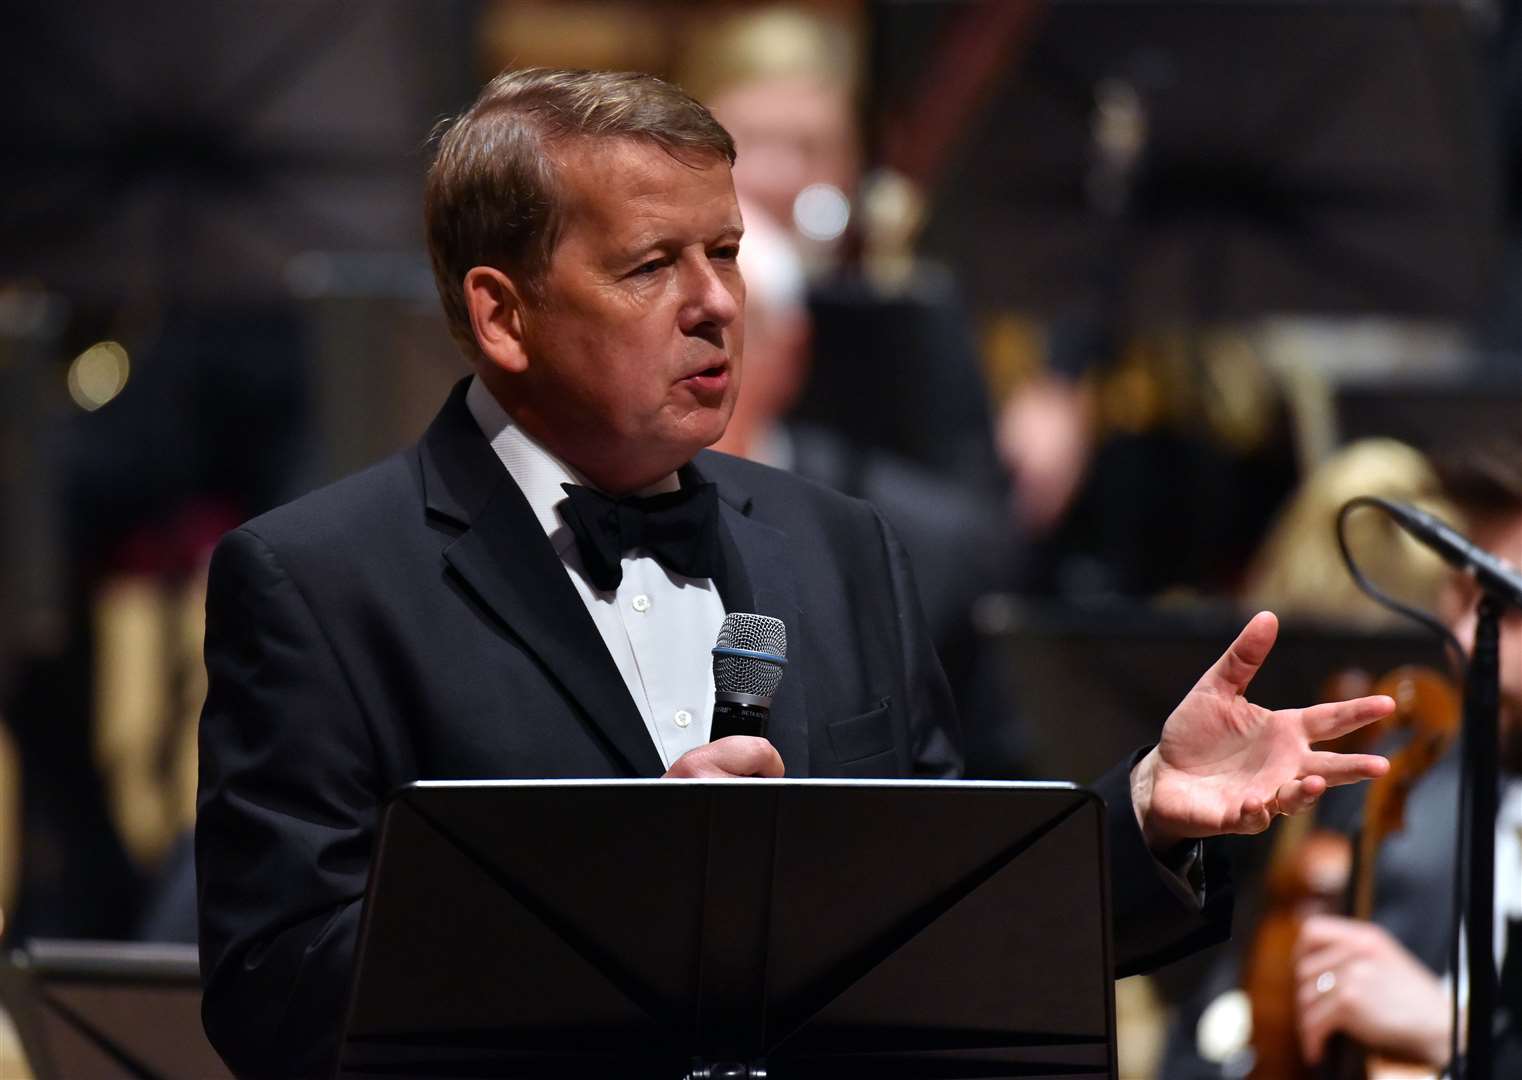 Bill Turnbull presents on stage with the Royal Liverpool Philharmonic Orchestra during Classic FM’s 25th birthday concert at the Liverpool Philharmonic Hall in 2017 (Matt Crossick/PA)